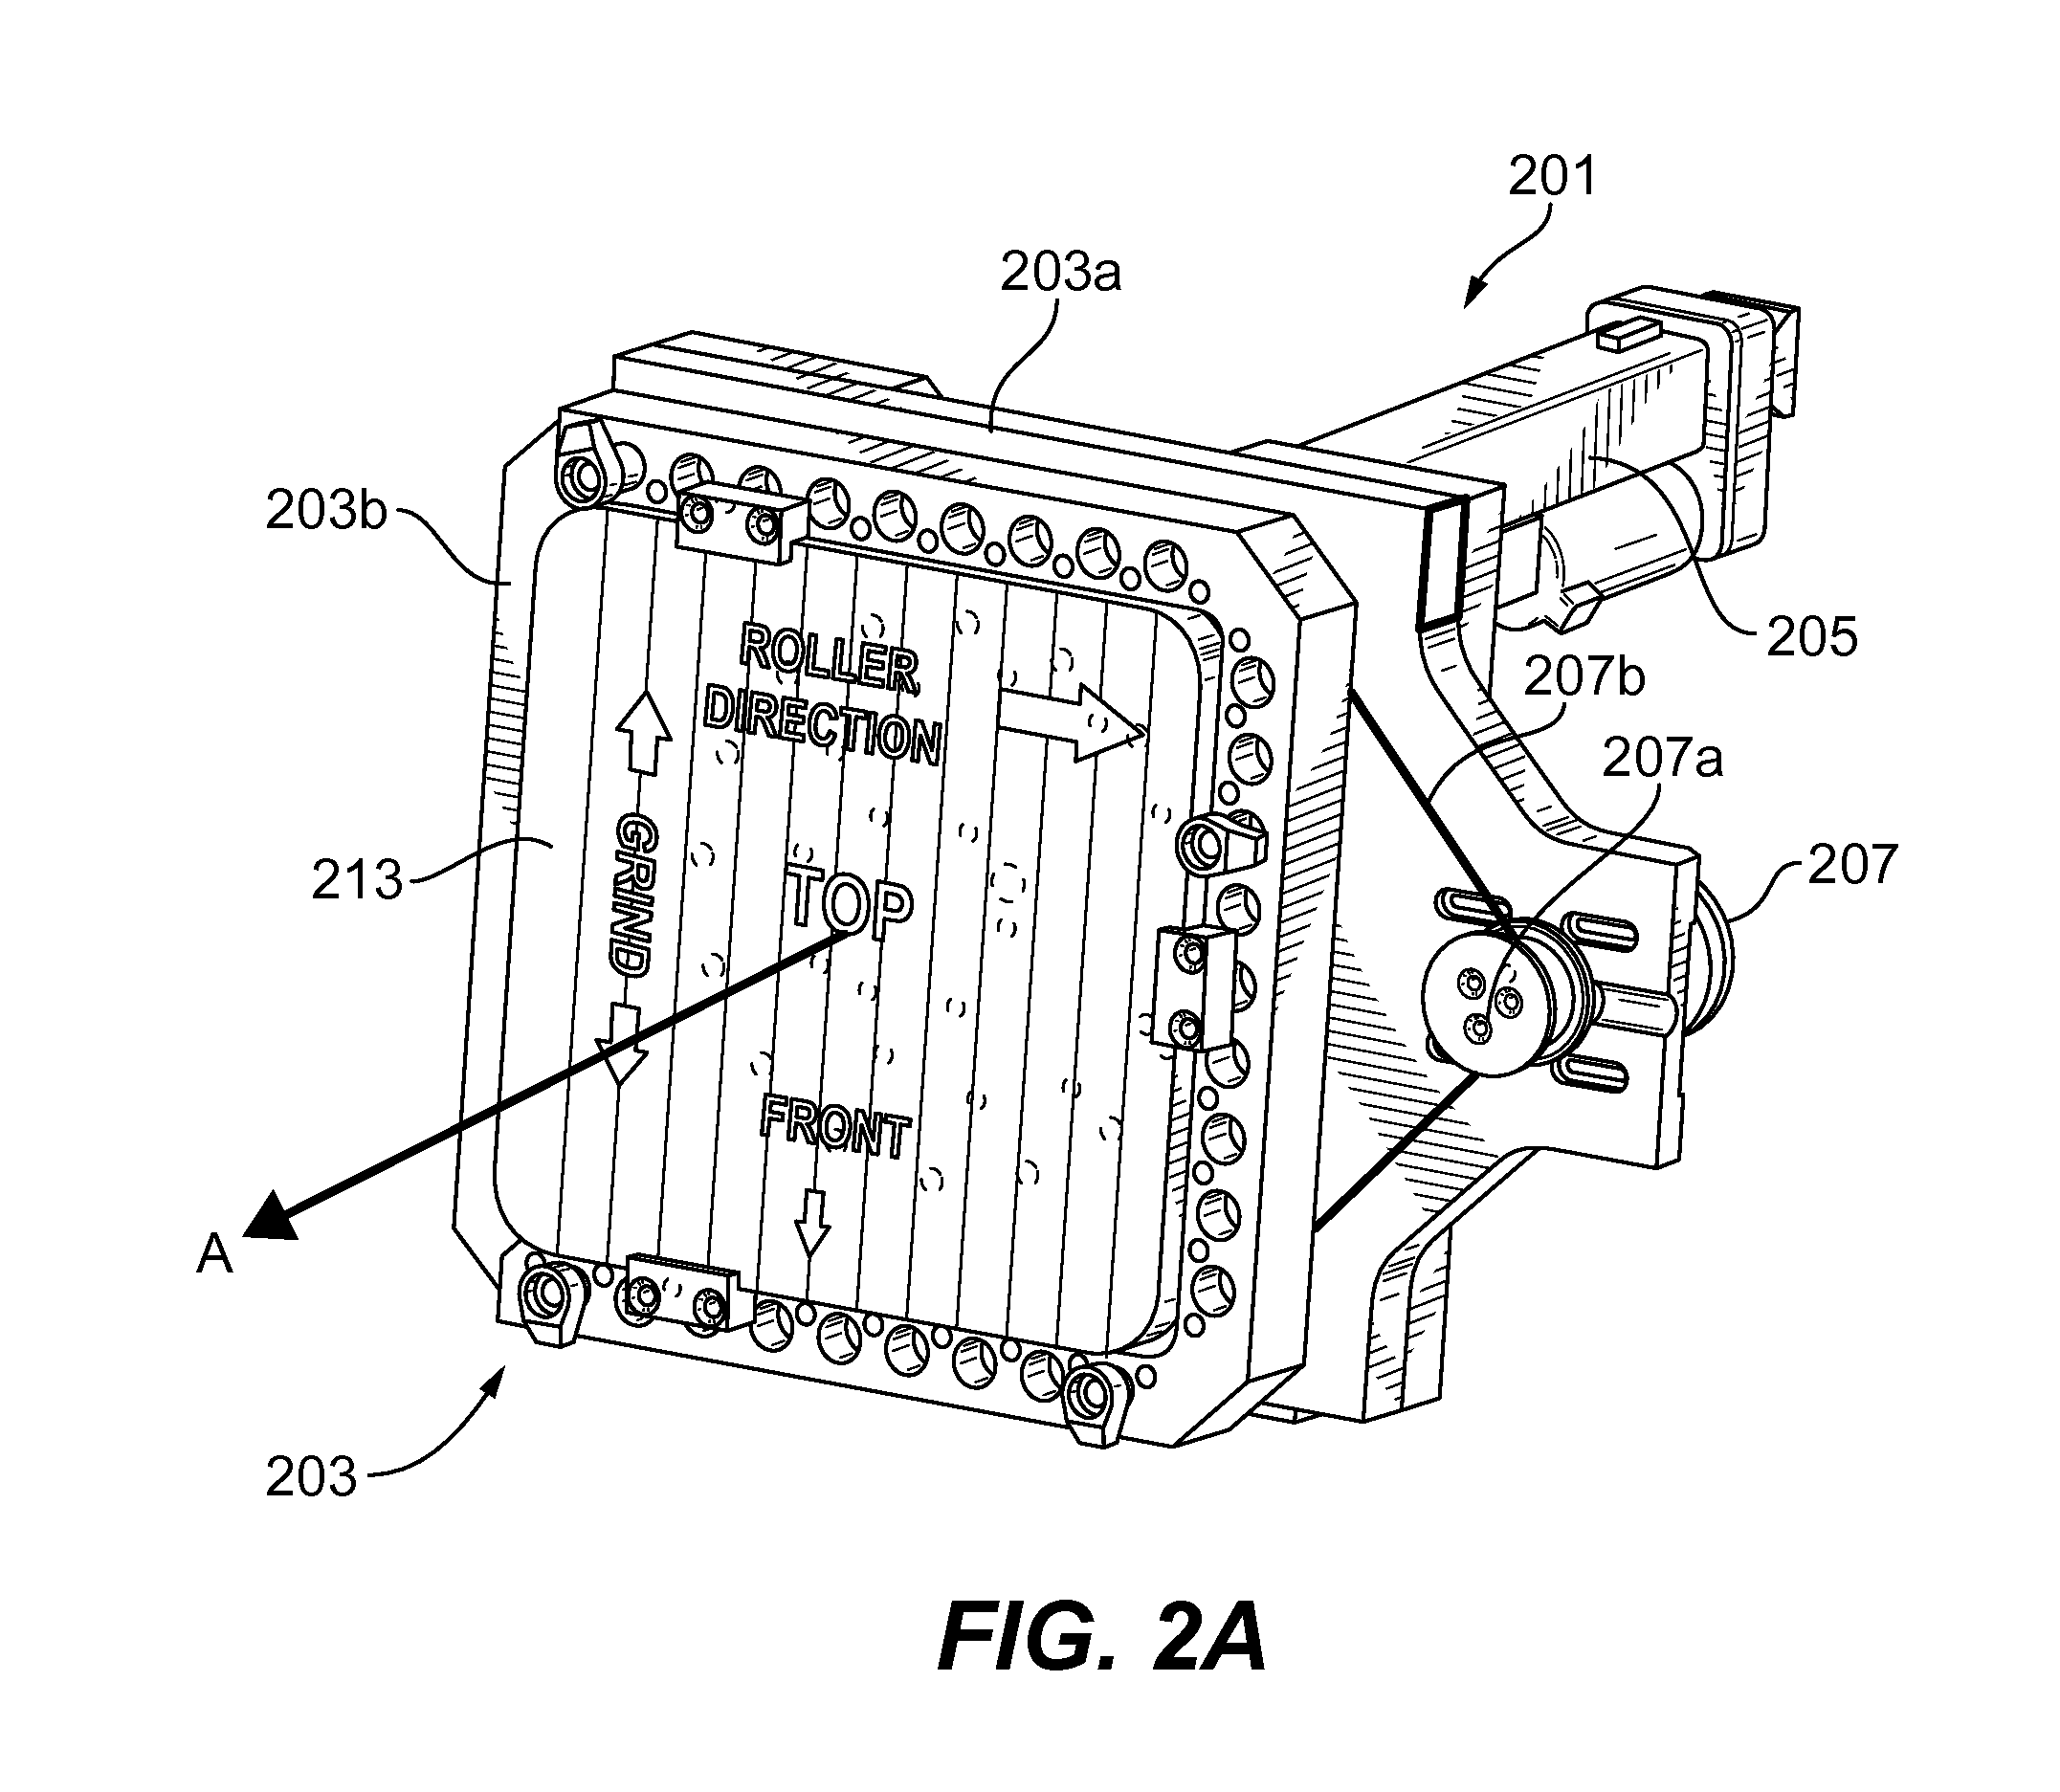 Systems and methods for post additive manufacturing processing